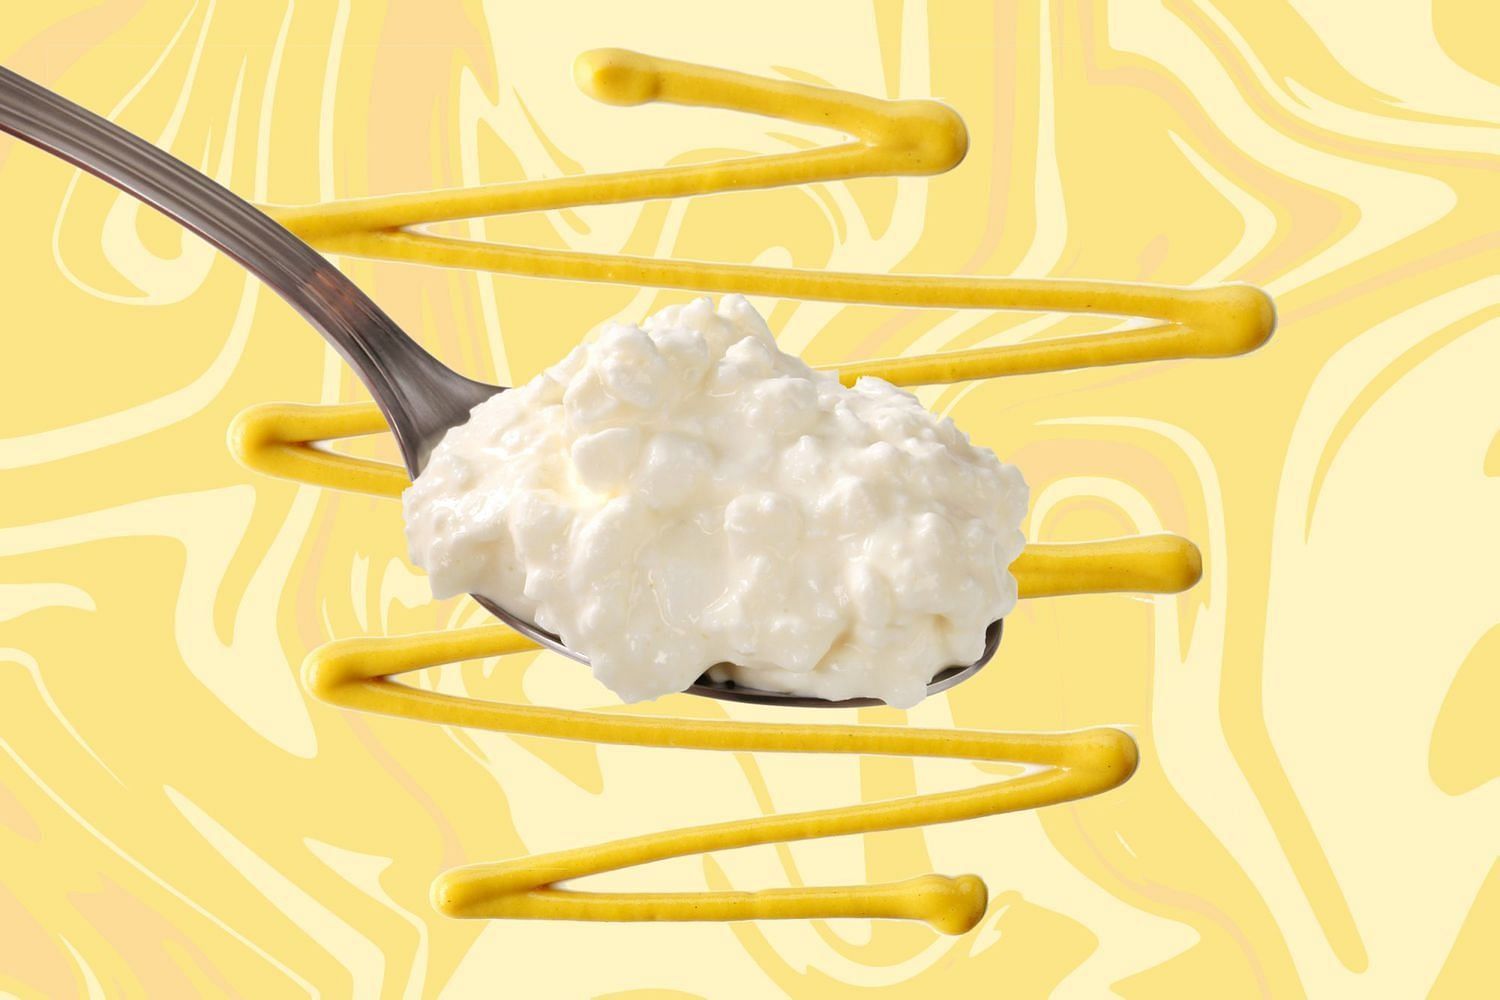 Cottage cheese and mustard (Image via Eatingwell)